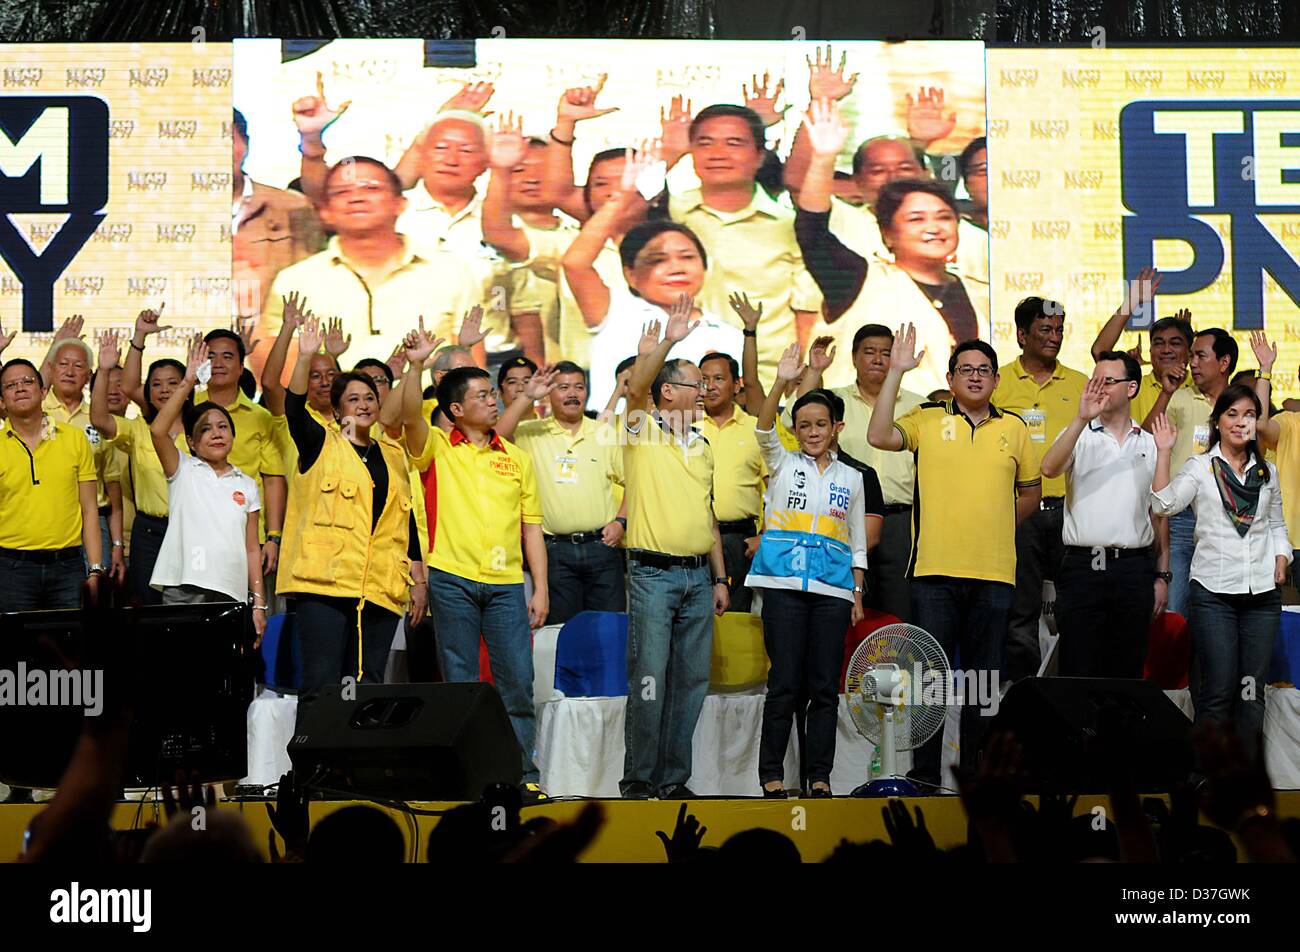 Manila, Philippines. 12th February 2013. Administration senatorial candidates together with Philippine President BENIGNO AQUINO III wave their hands during a proclamation rally for their slate in the May congressional and local election in Manila, 12 February 2013. Senatorial candidates for the May 13 midterm elections kicked off their campaigns as the official start of the campaign period for national positions started. The campaign season is slated from February 12 to May 11, 2013. � Credit: Ezra Acayan / Alamy Live News Stock Photo